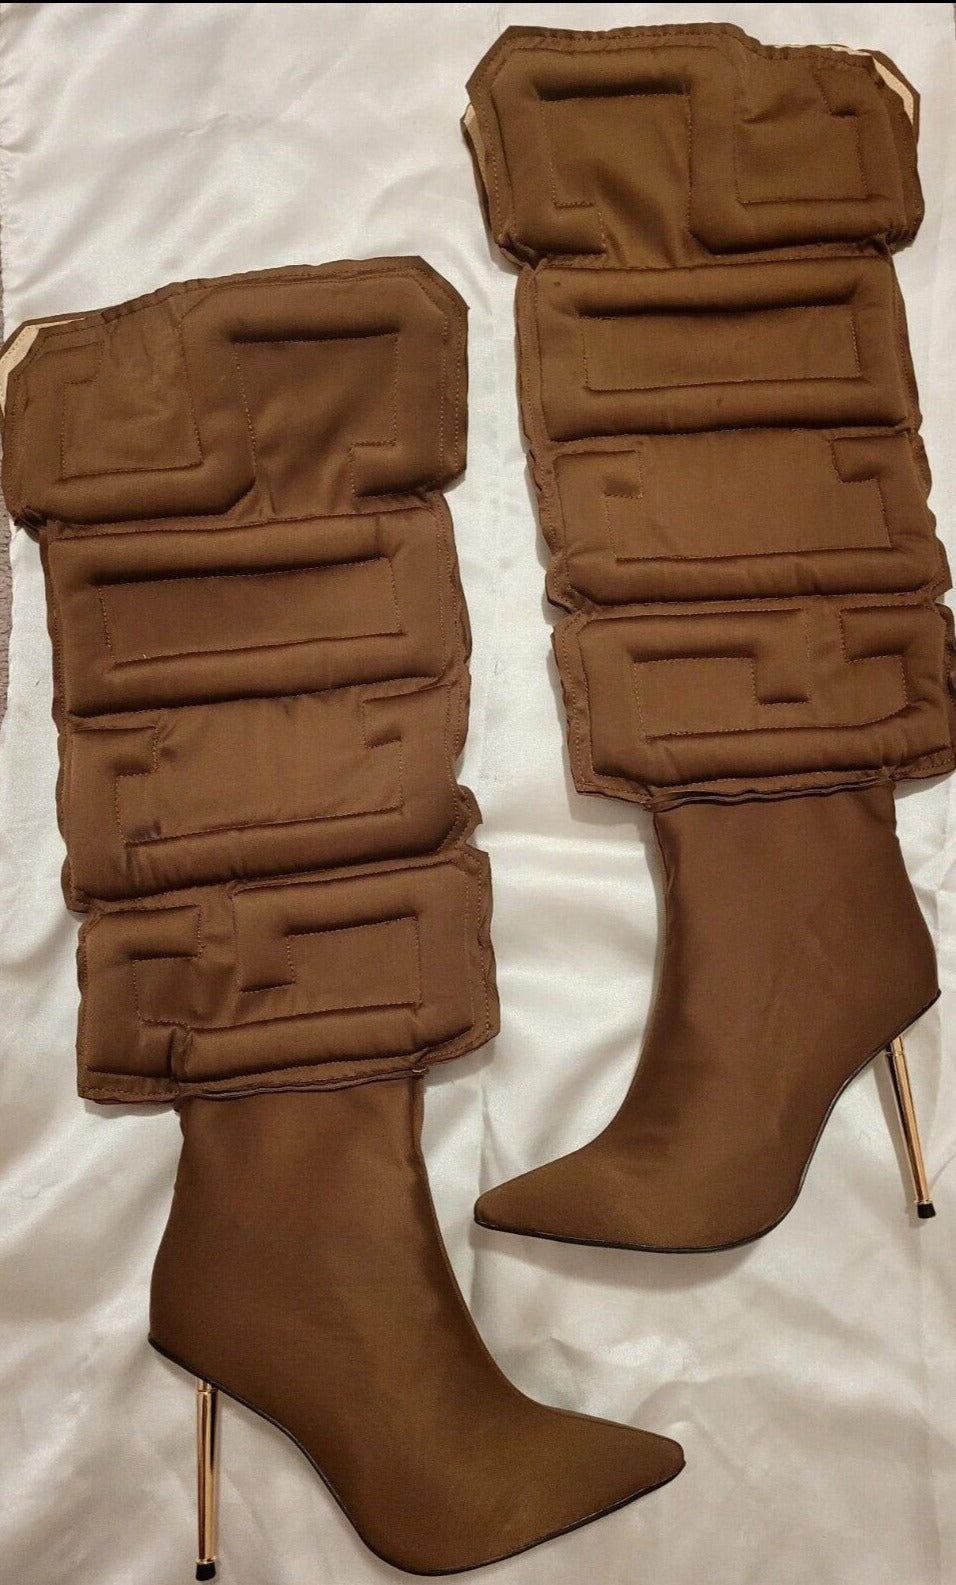 Clearance - GCDS Inspired Vinyl Material Knee High Boots